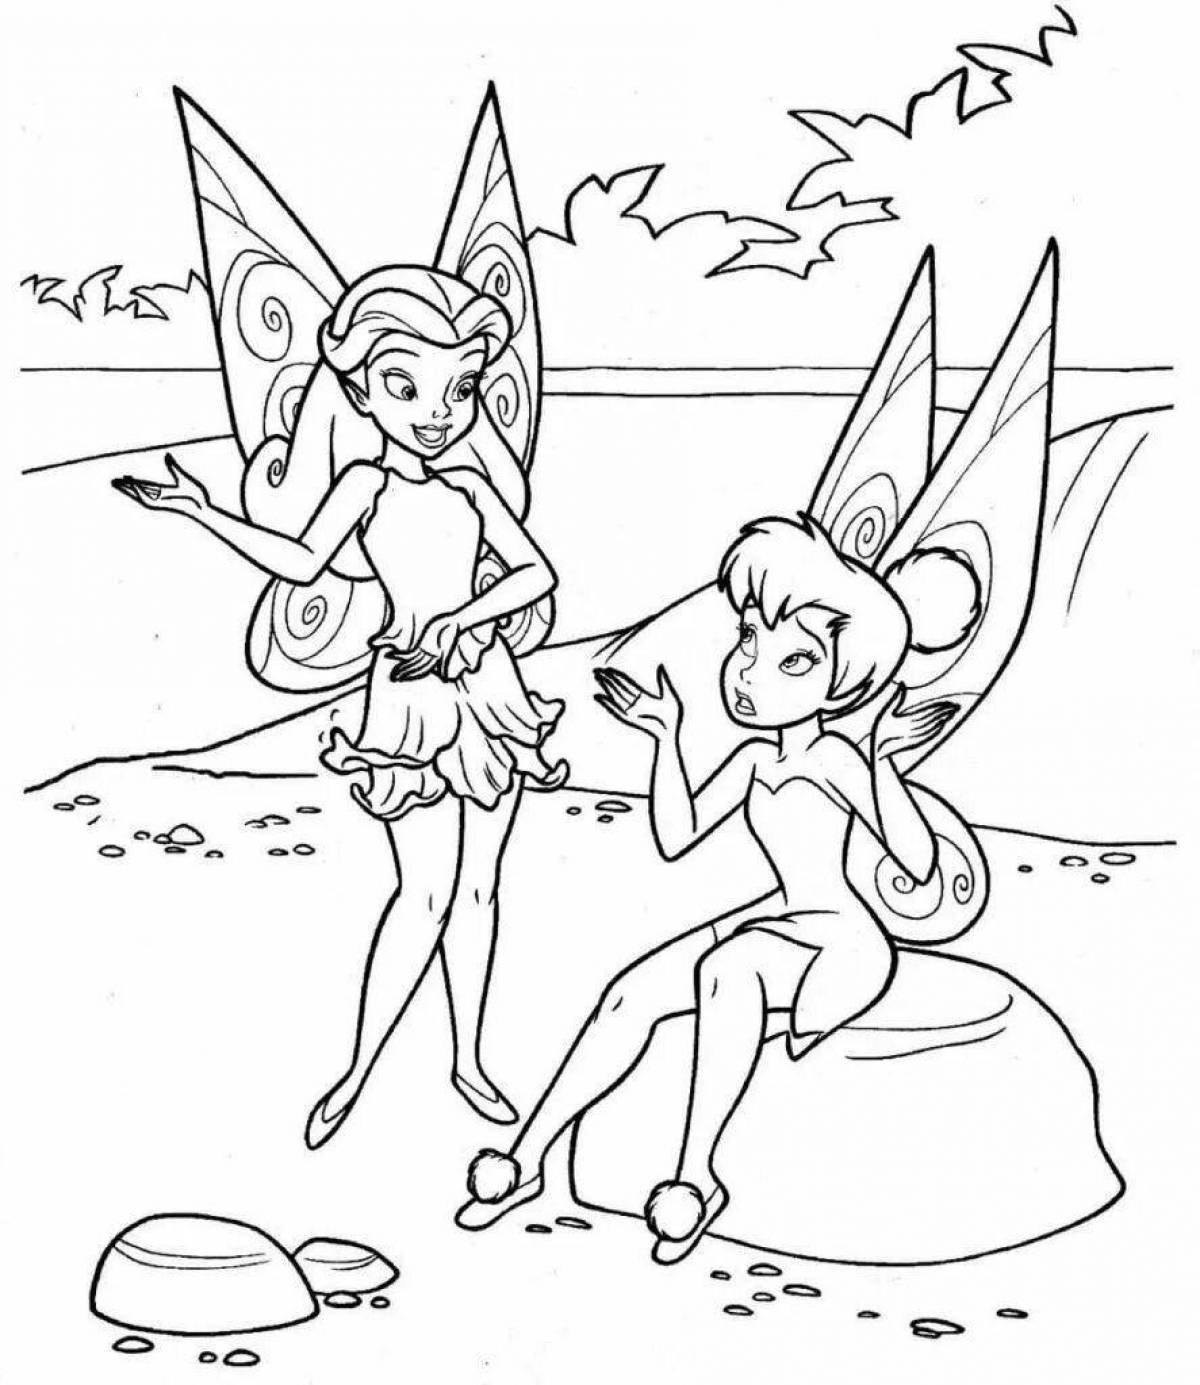 Funny fairy coloring pages for kids 5-6 years old